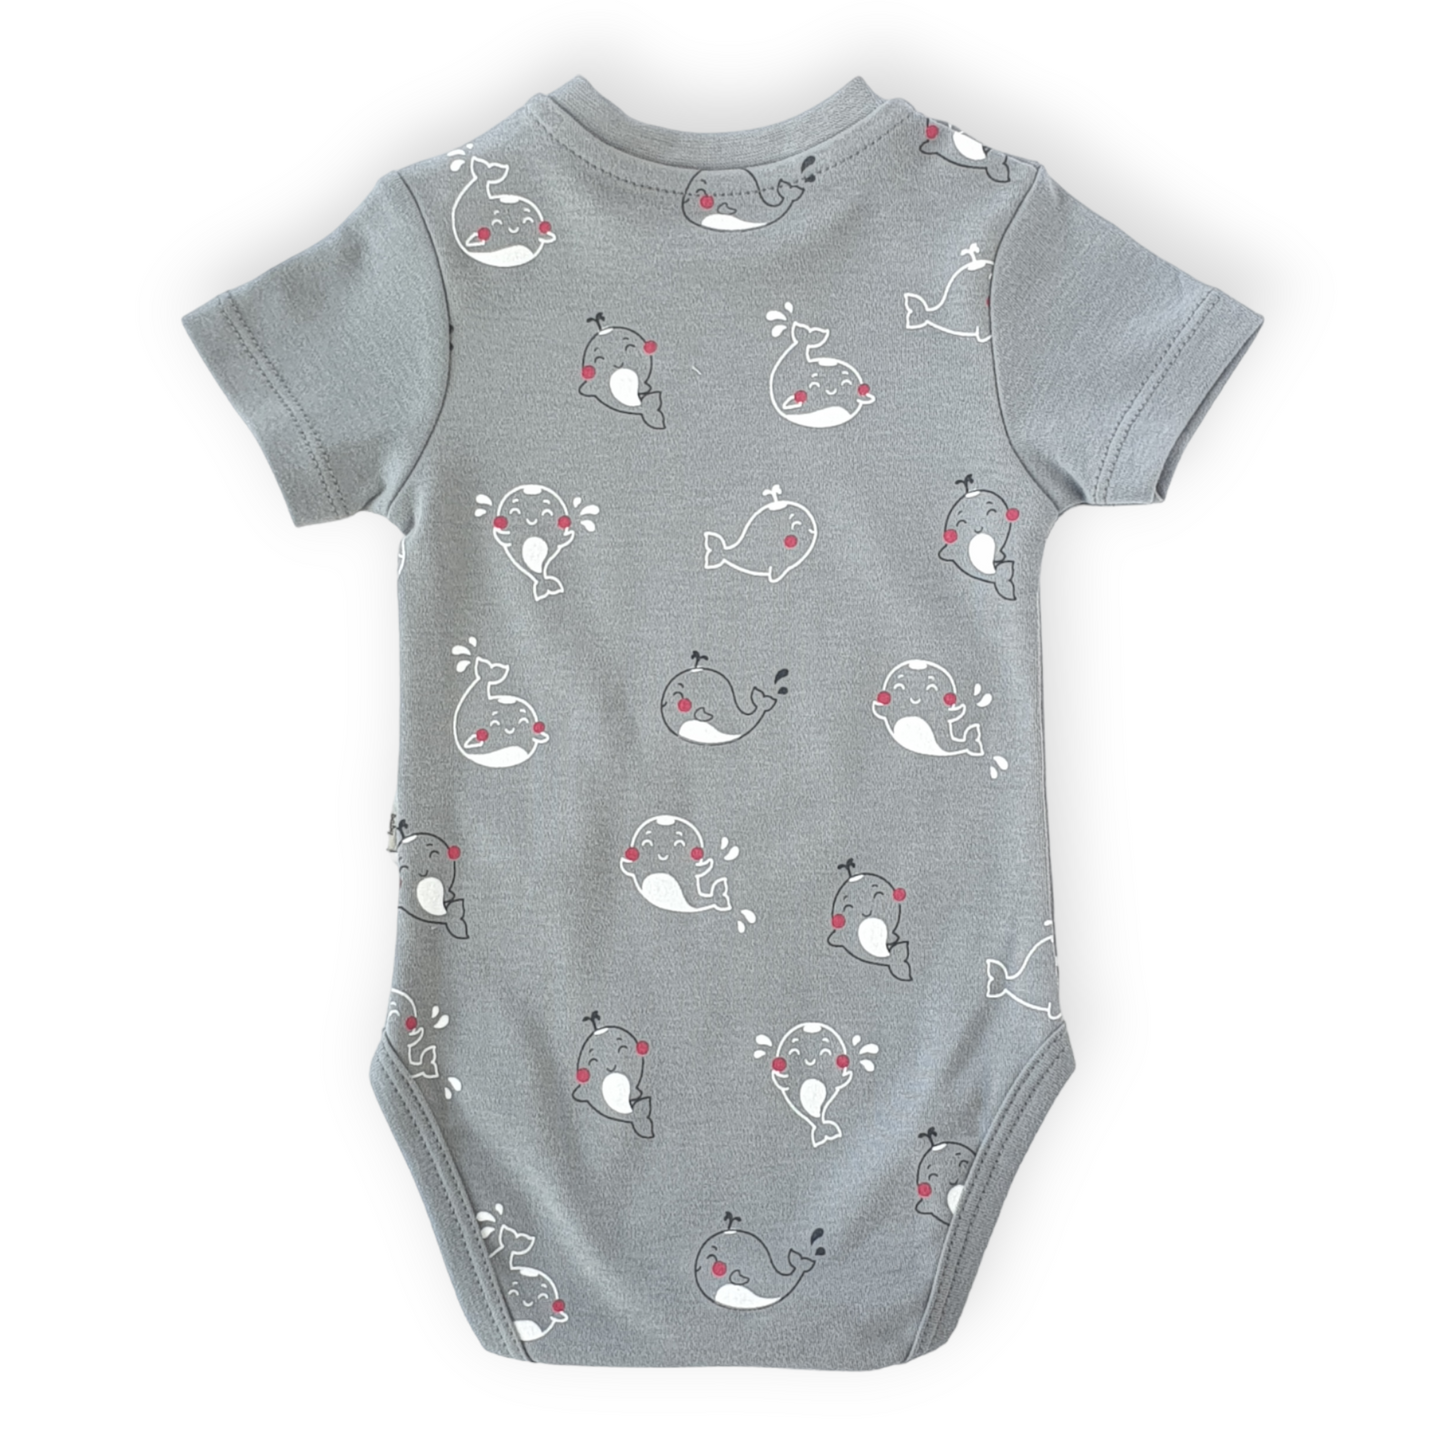 Grey Body with Whale prints-Body, Bodysuit, Boy, Catboy, Catgirl, Catunisex, Creeper, Girl, Grey, Onesie, Short sleeve, SS23-Tongs-[Too Twee]-[Tootwee]-[baby]-[newborn]-[clothes]-[essentials]-[toys]-[Lebanon]